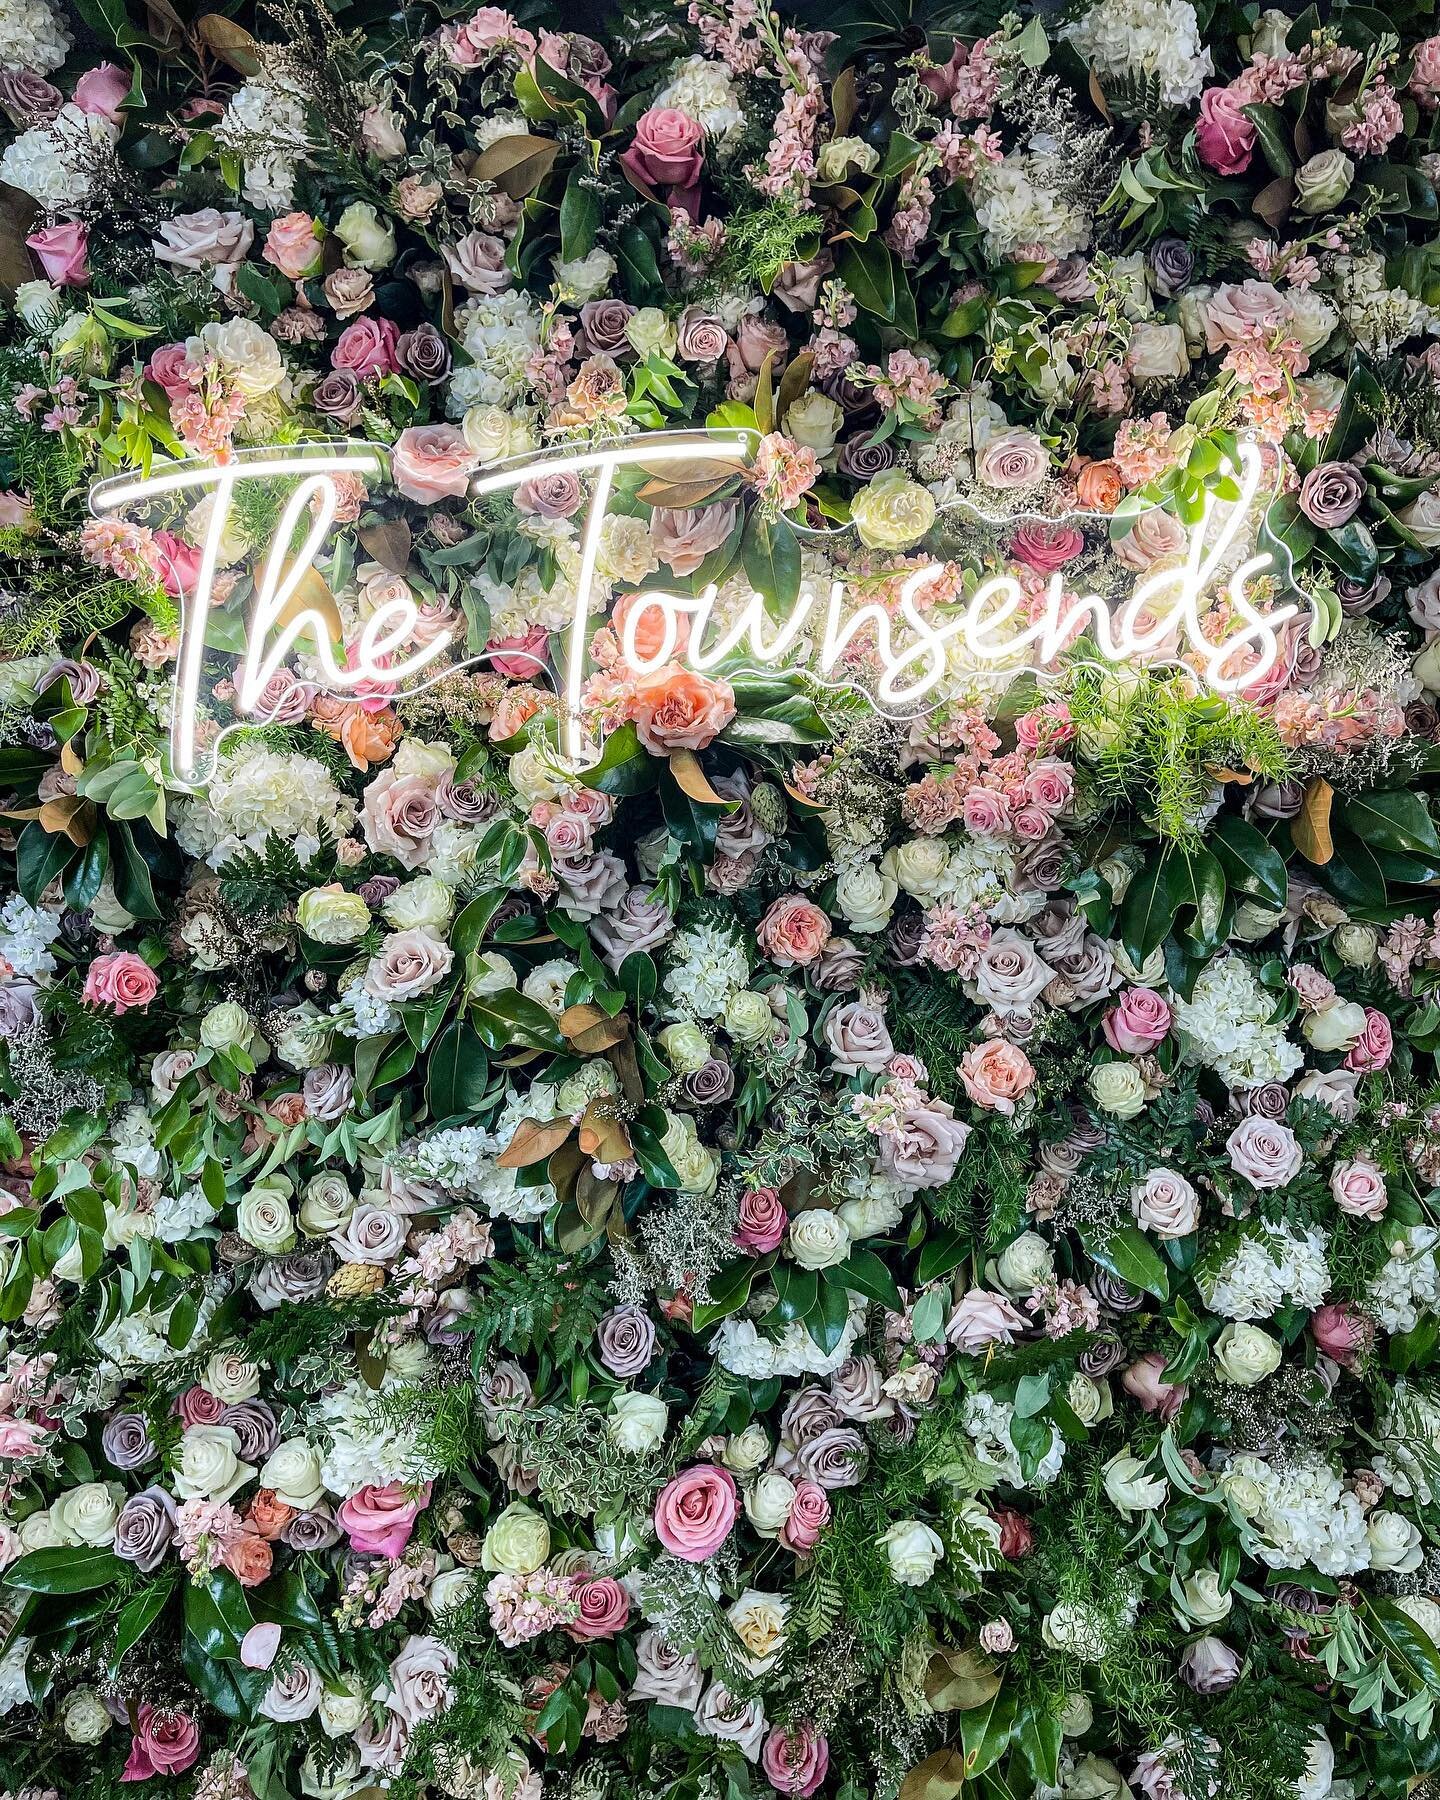 When you dream in FL🌼WERS?&hellip;a custom 8&rsquo;T x 8&rsquo;W full floral backdrop for The Townsends. Can you imagine anything more perfect?! 

#copperandbirch #floristry #design #flowers #backdrop #inspo #weddingreception #custom #texasbride